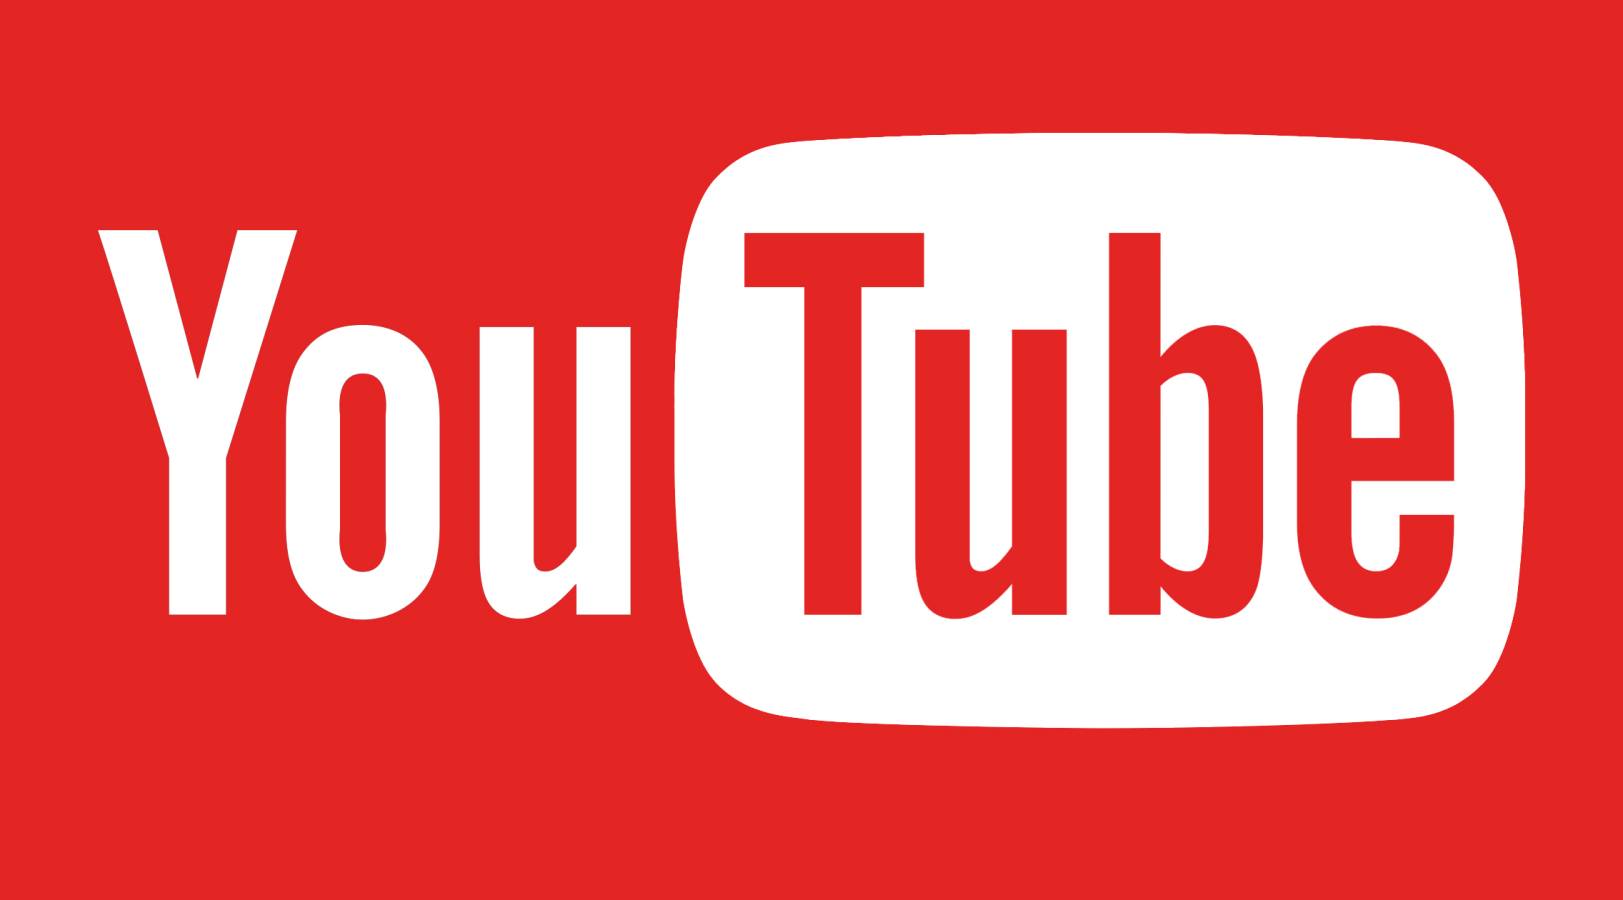 YouTube Update Brings News for Phones and Tablets